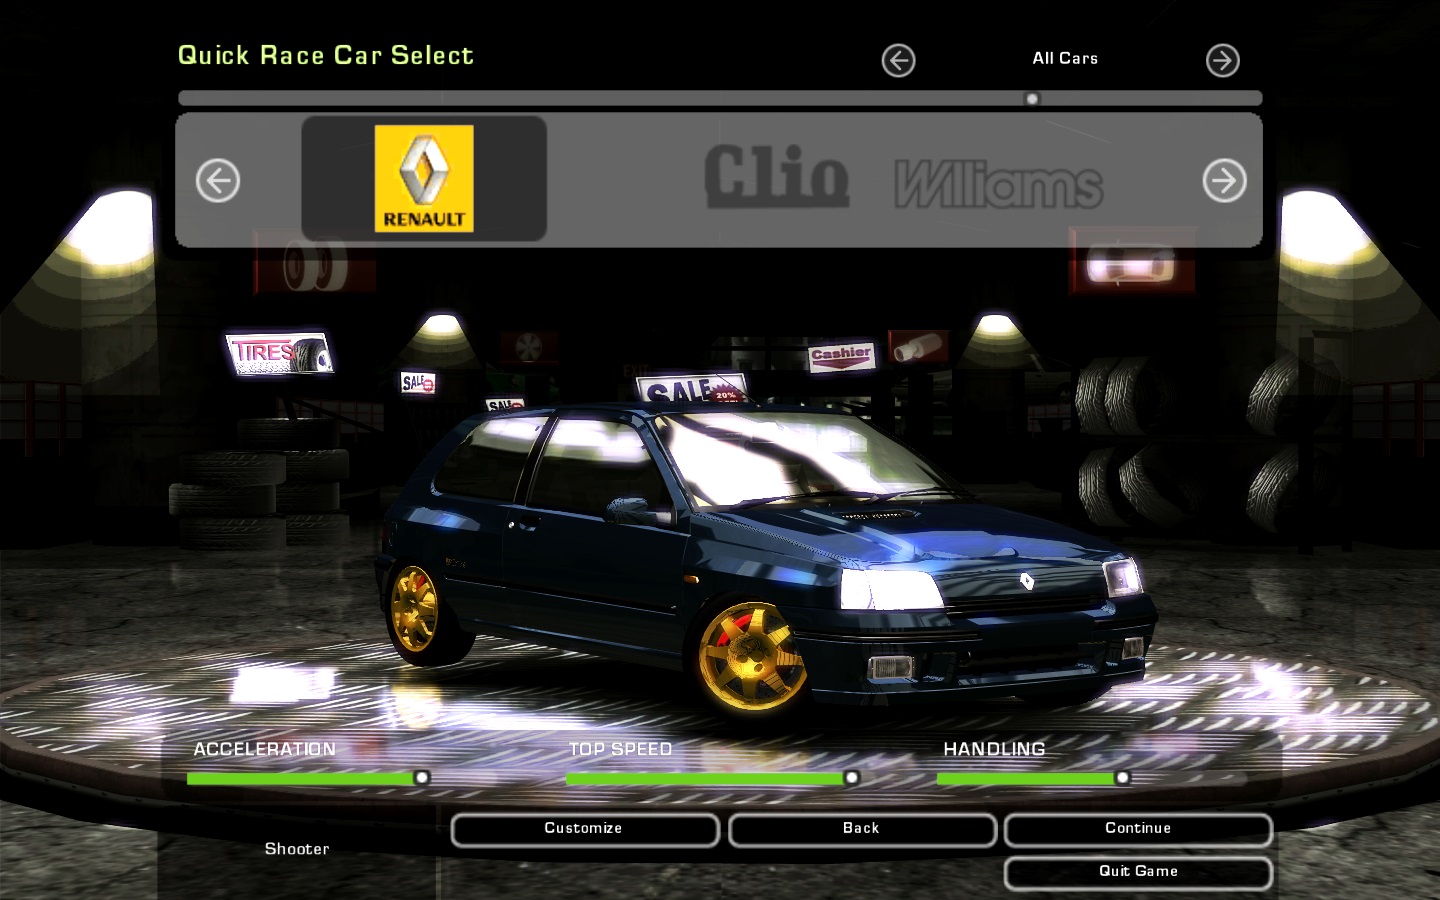 Need For Speed Underground 2 Renault Clio Williams | NFSCars
